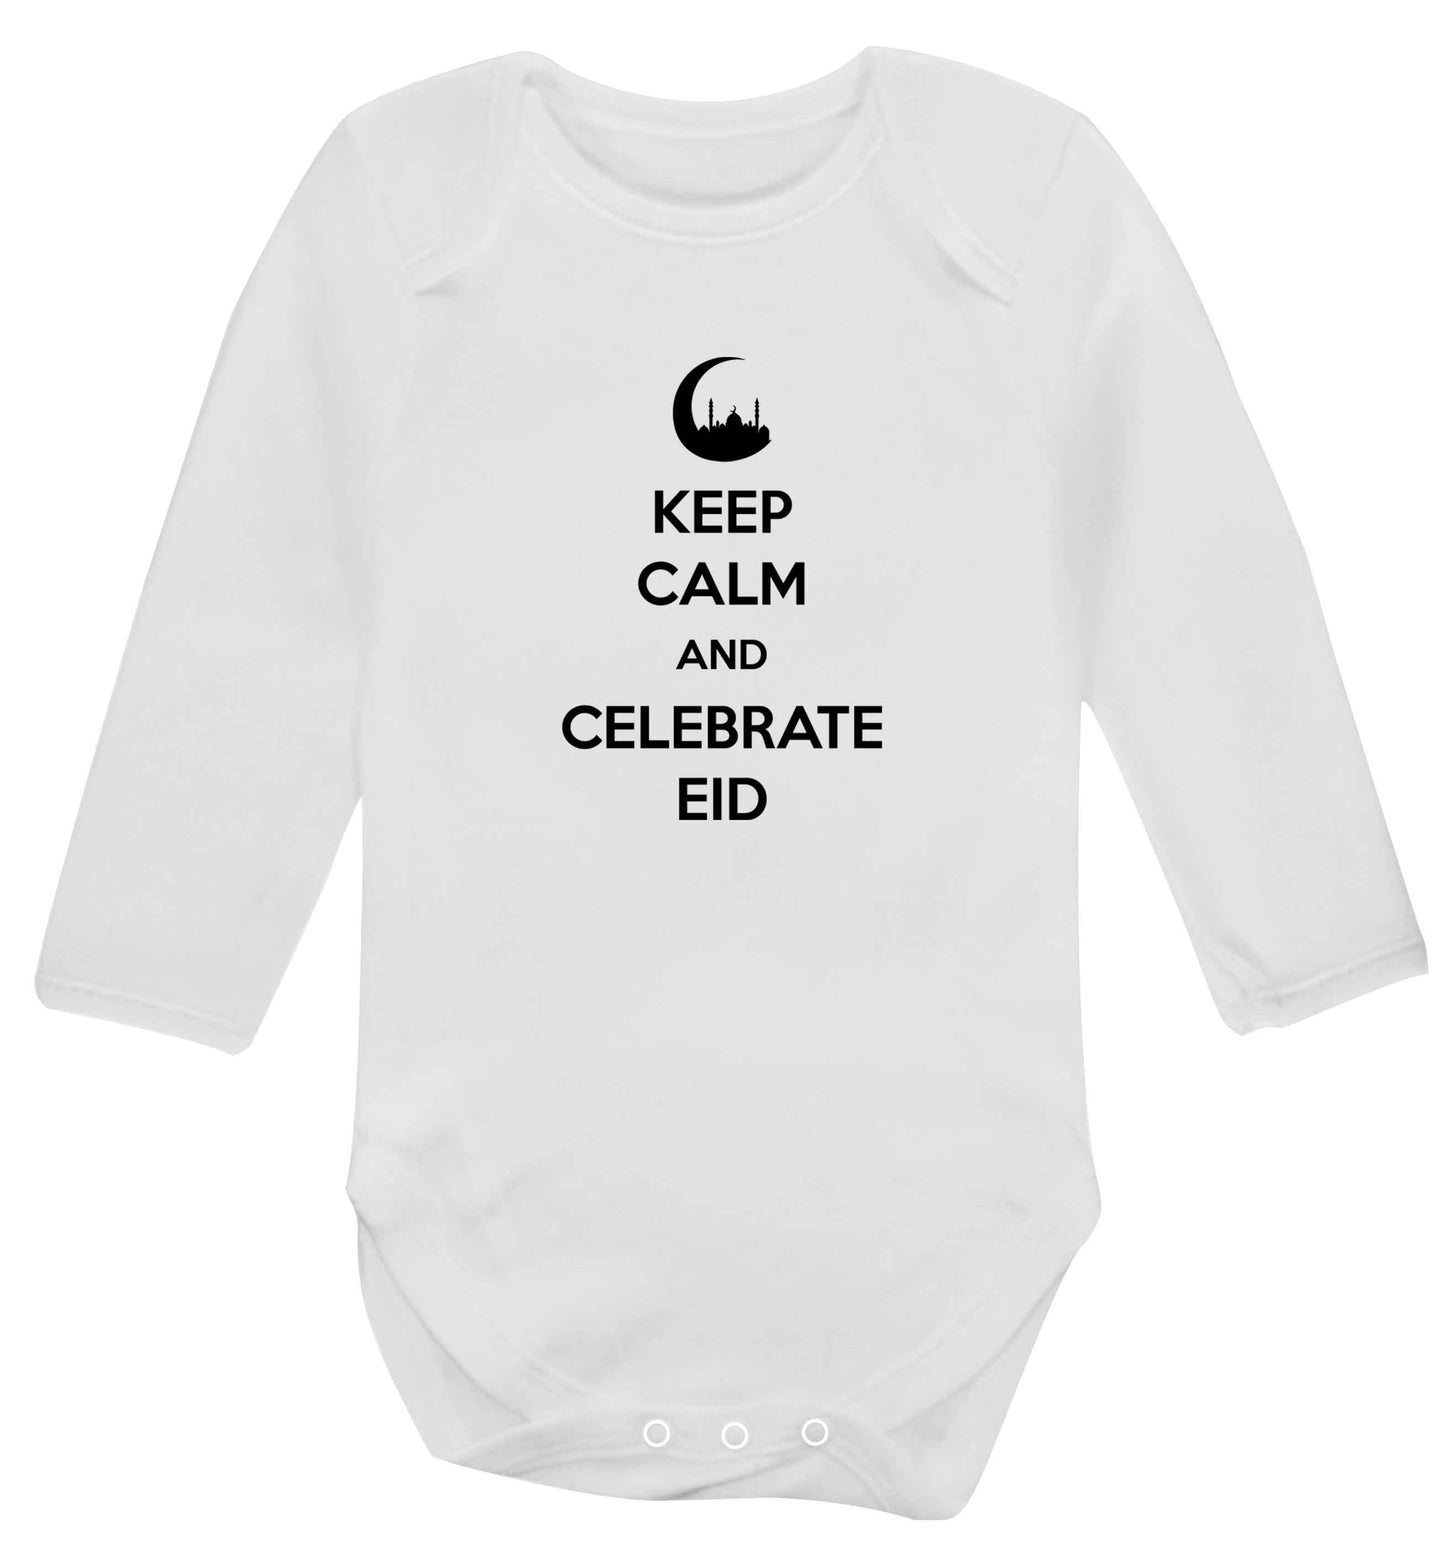 Keep calm and celebrate Eid baby vest long sleeved white 6-12 months